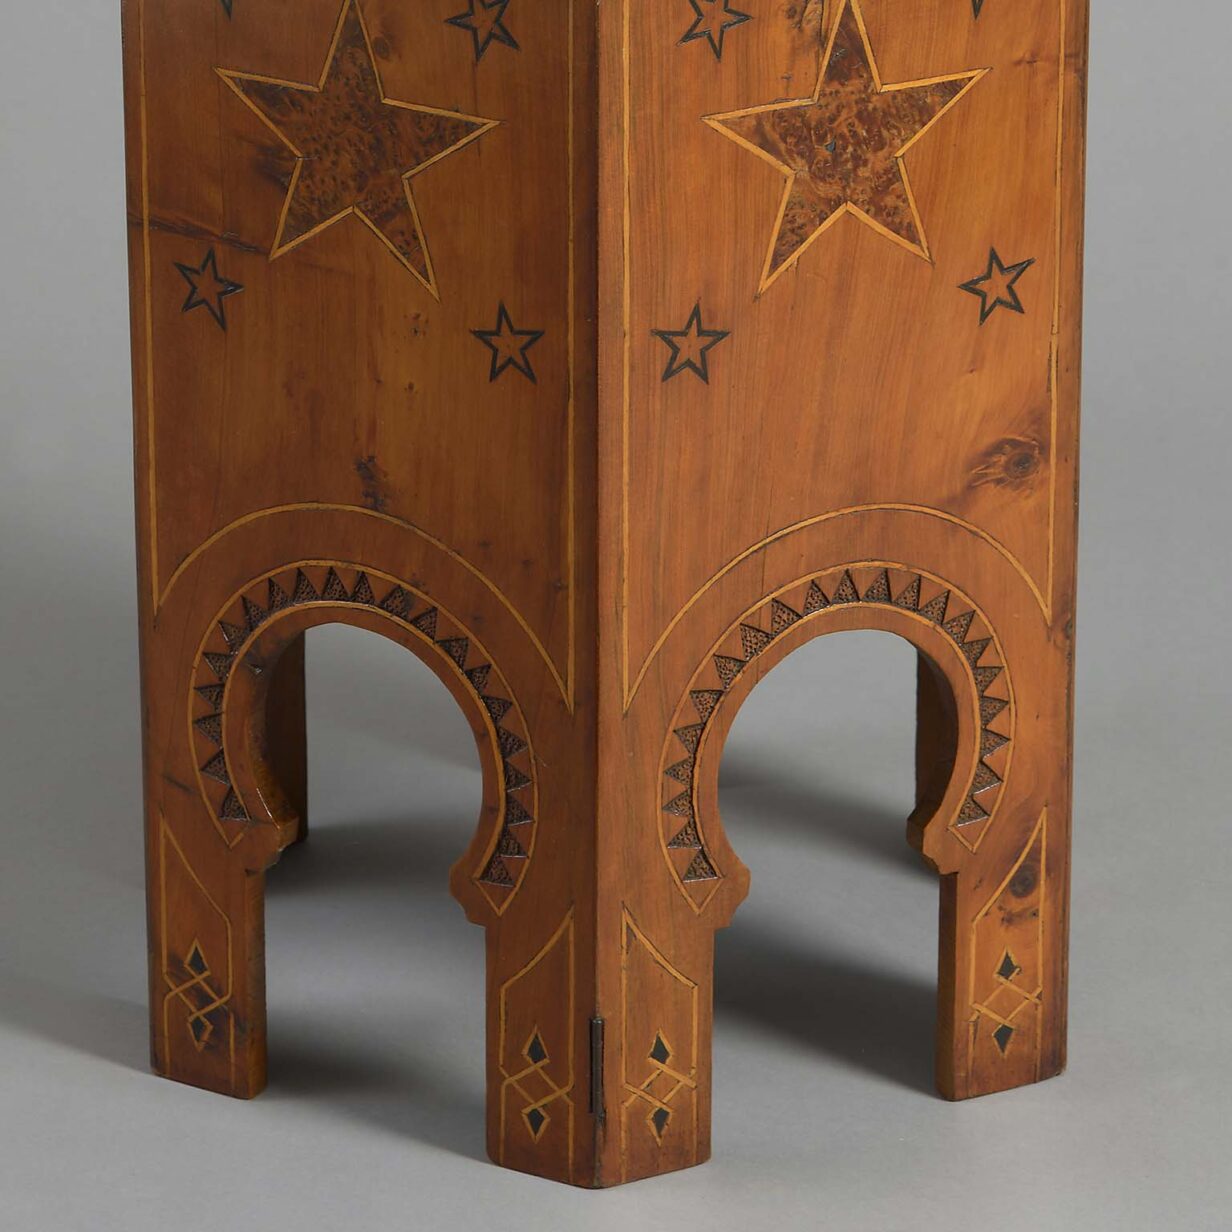 19th century inlaid yew wood low table